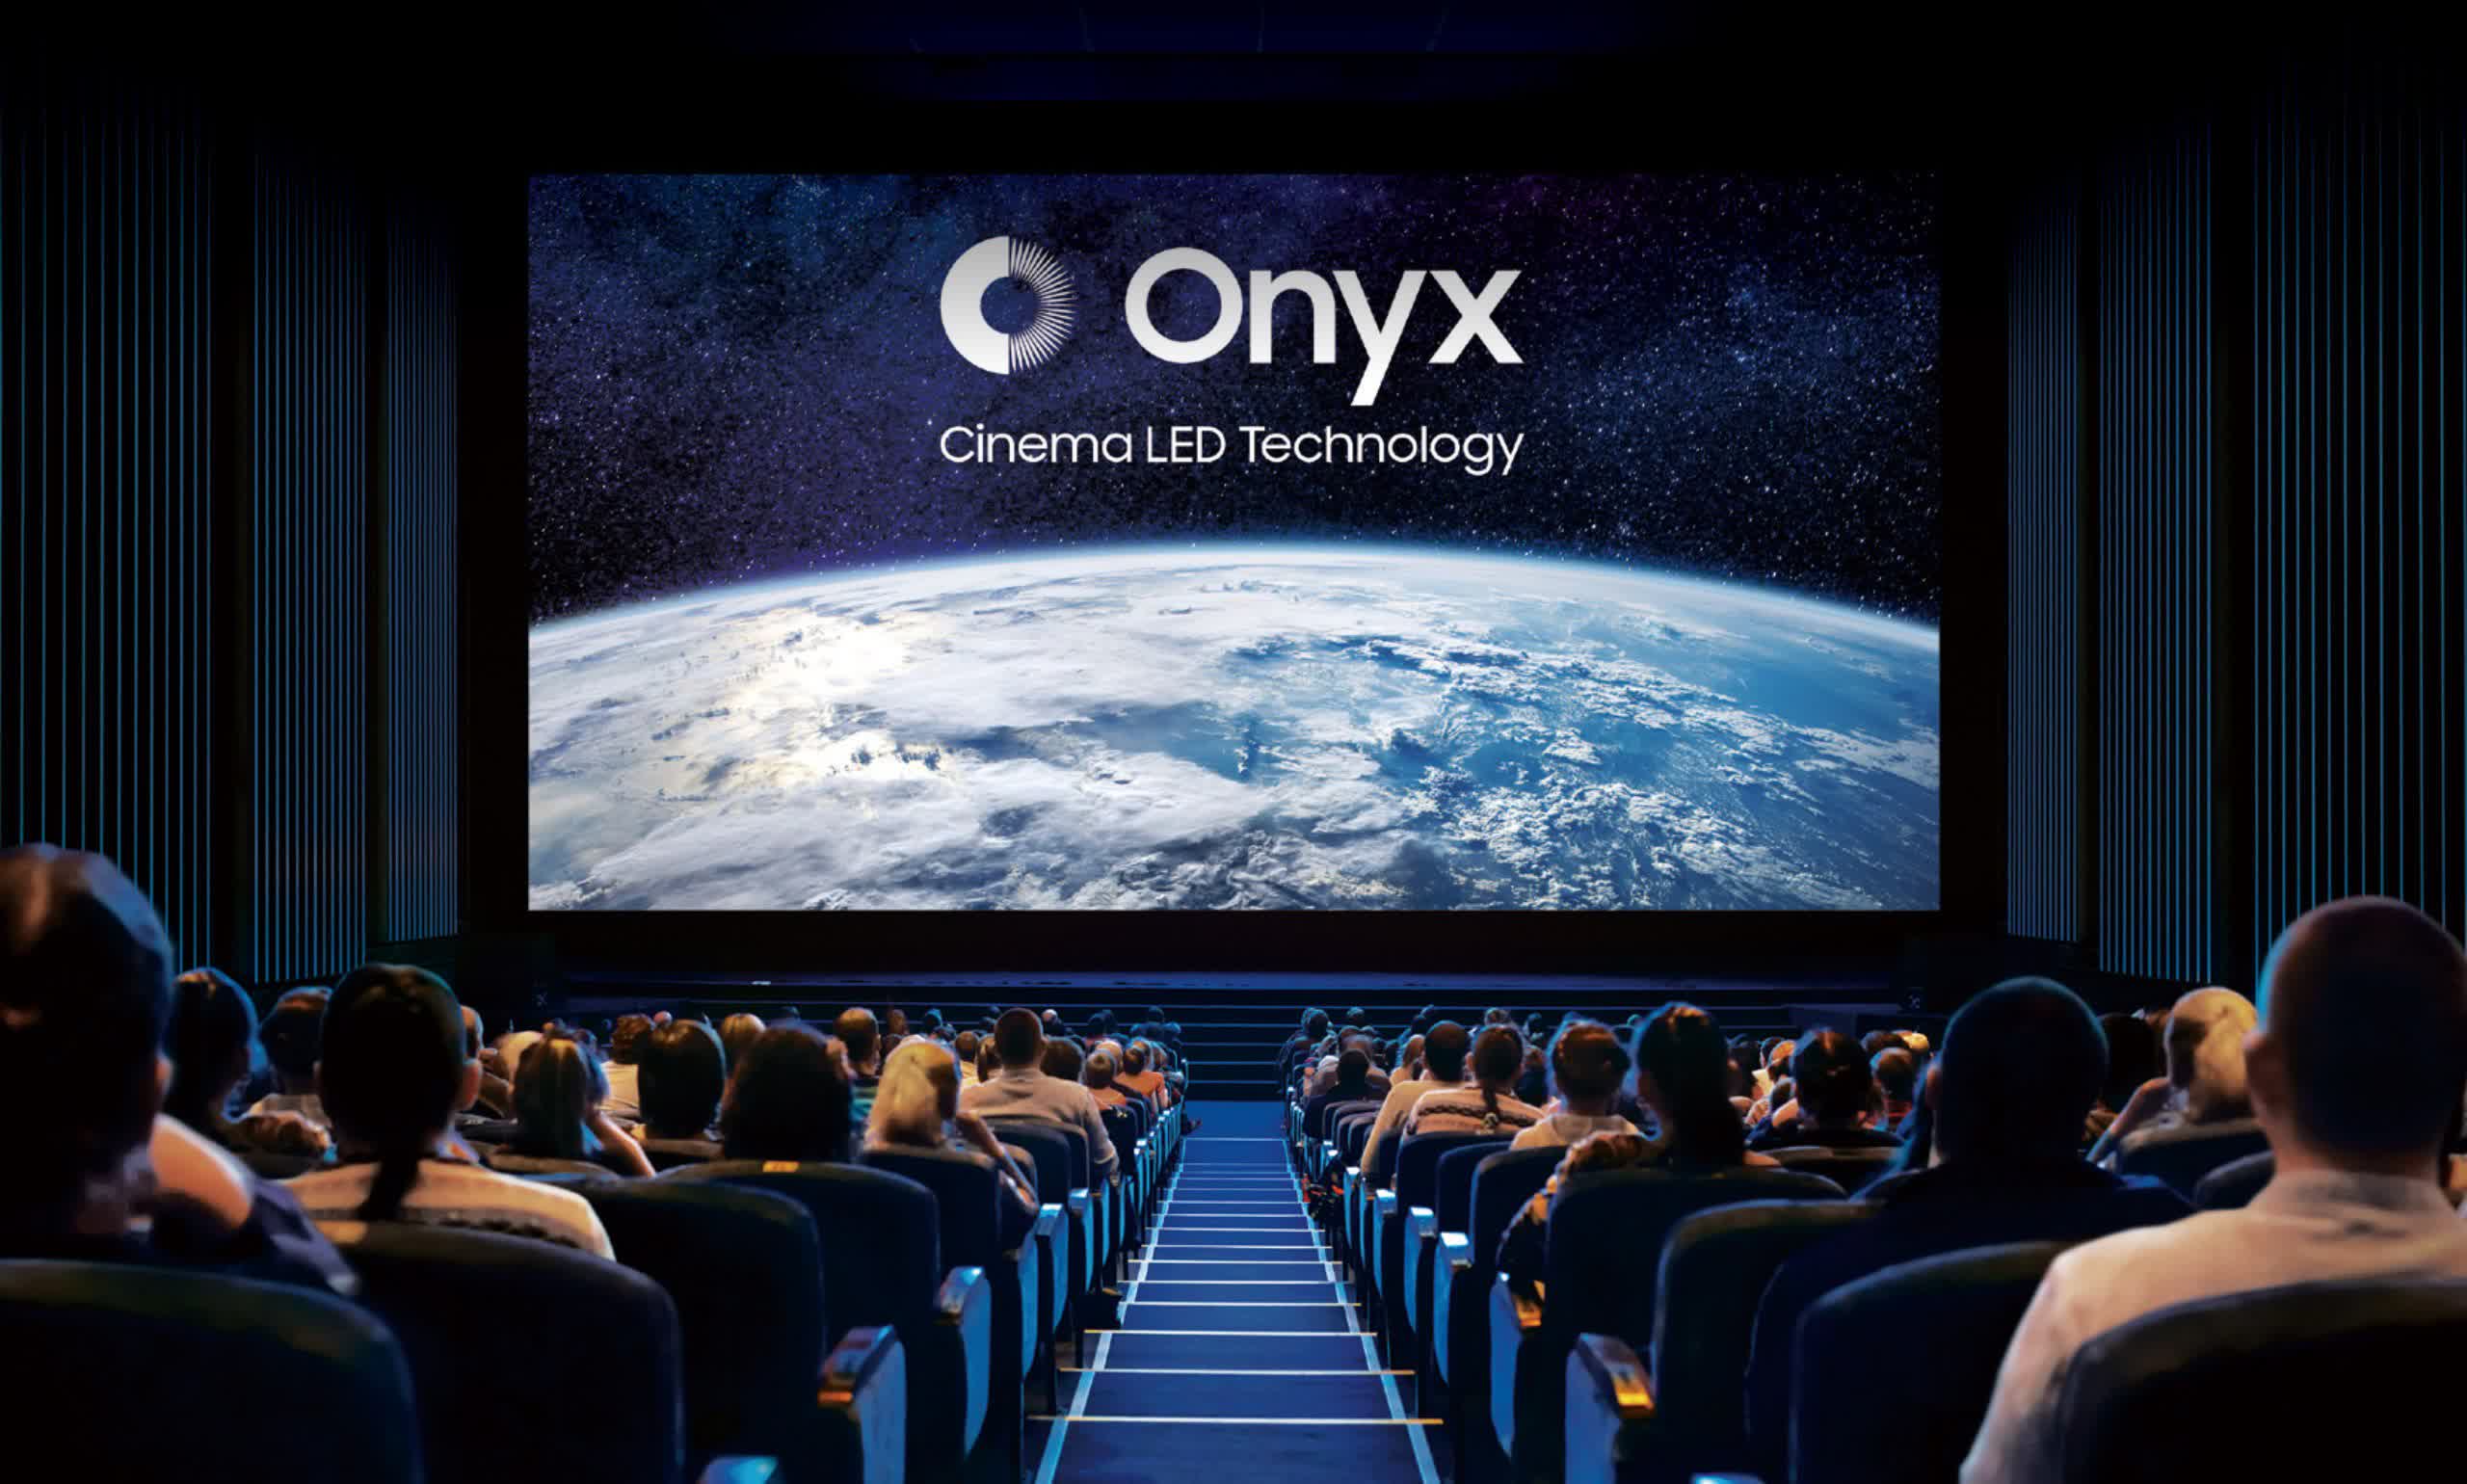 Samsung and LG are promoting Cinema LED screen adoption in theaters